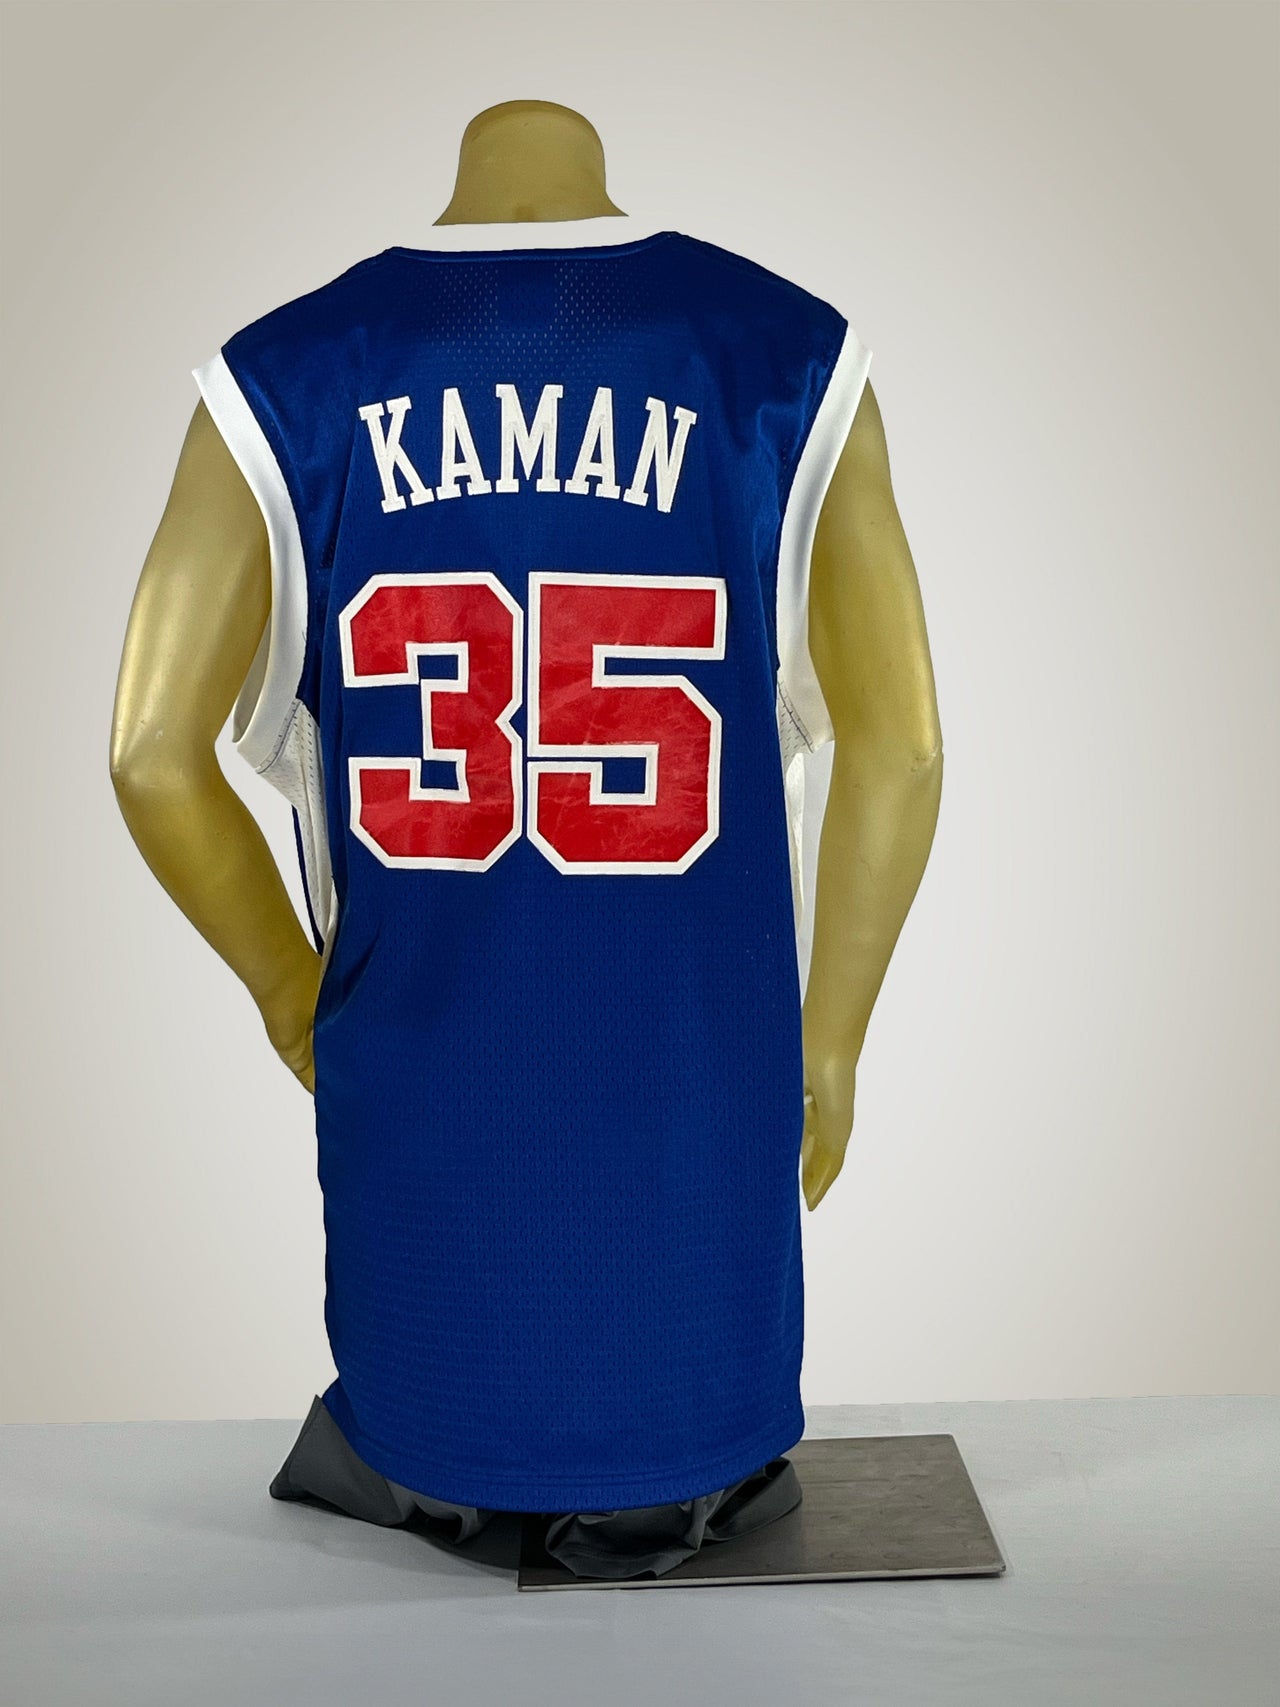 Gameday Grails Jersey XX-Large Vintage Los Angeles Clippers Chris Kaman Jersey